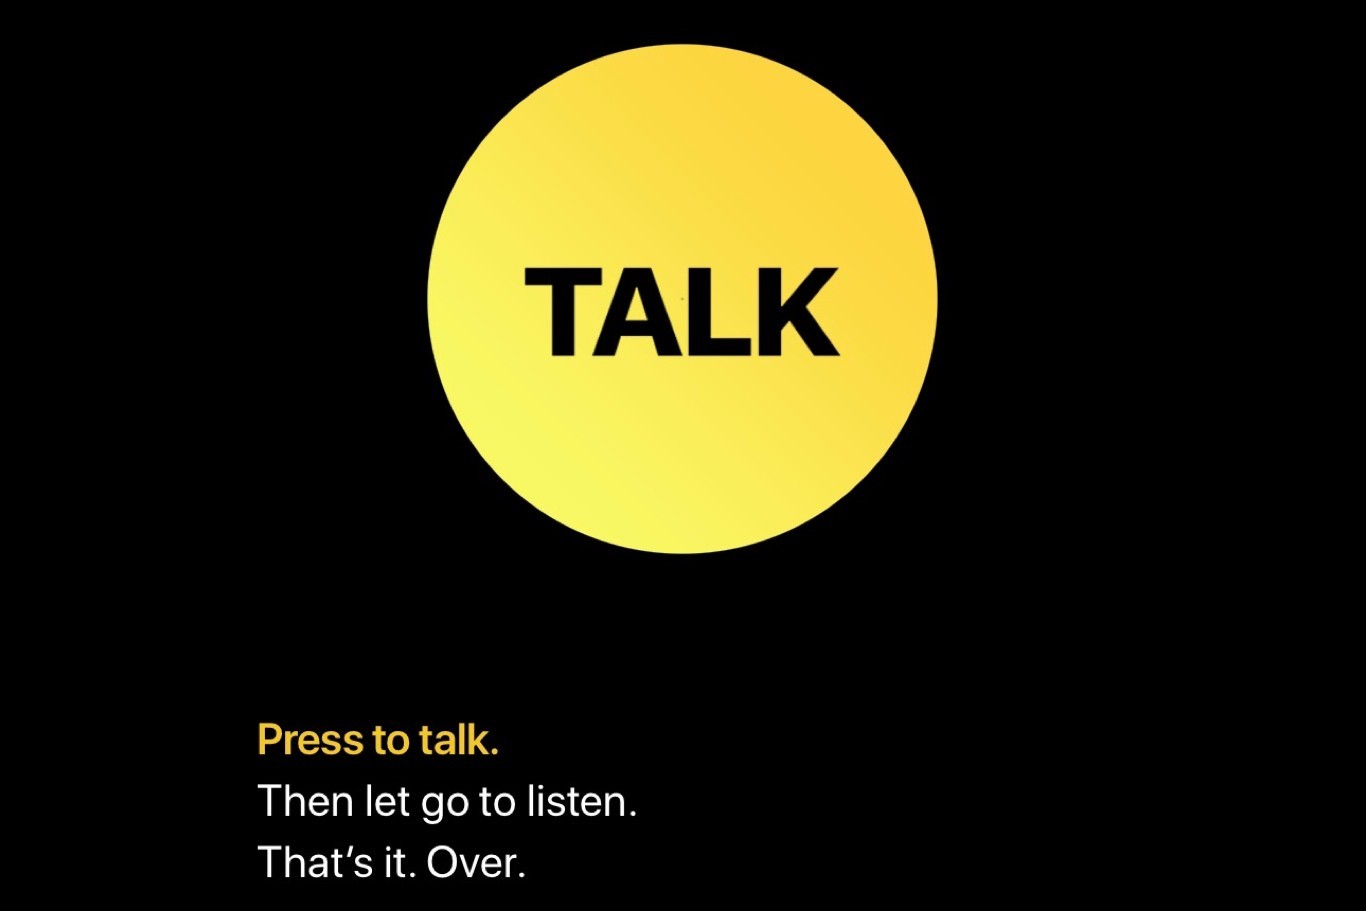 Walkie-Talkie in watchOS 5: a New and Fun way to Communicate with the Apple Watch